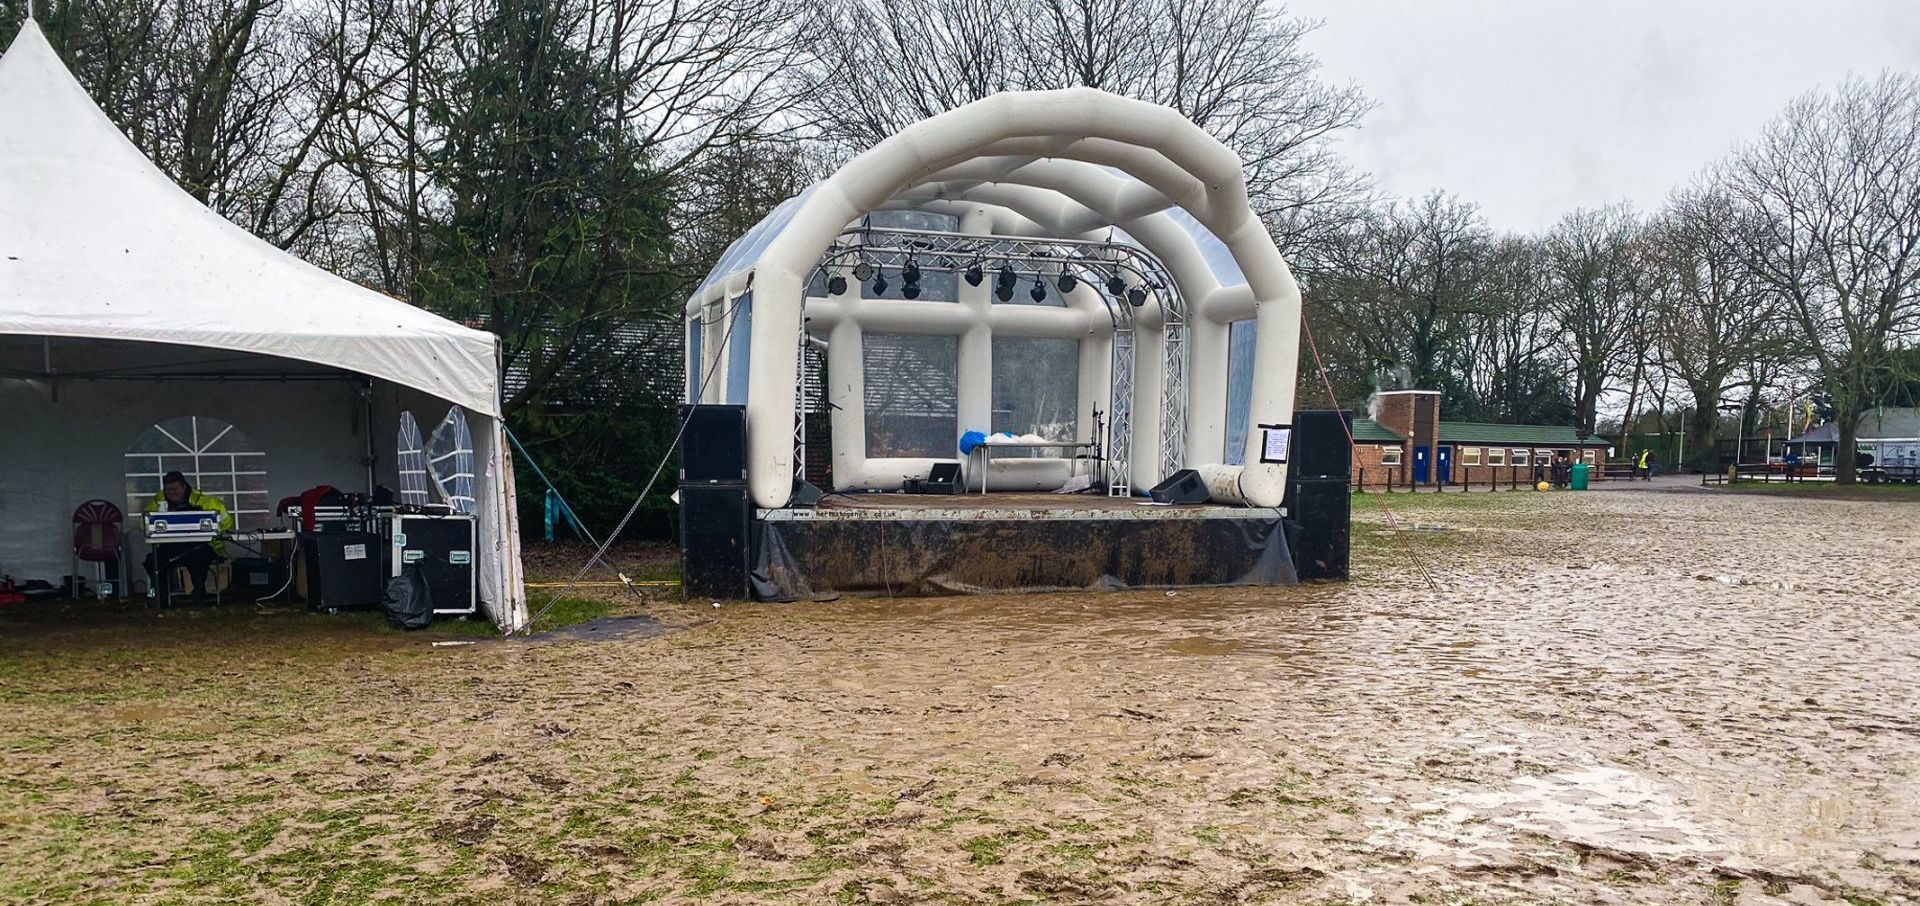 An inflatable roofed trailer stage in a very muddy and wet field, set up for an event. The black skirt at the front is covered in mud and the ground is water logged.